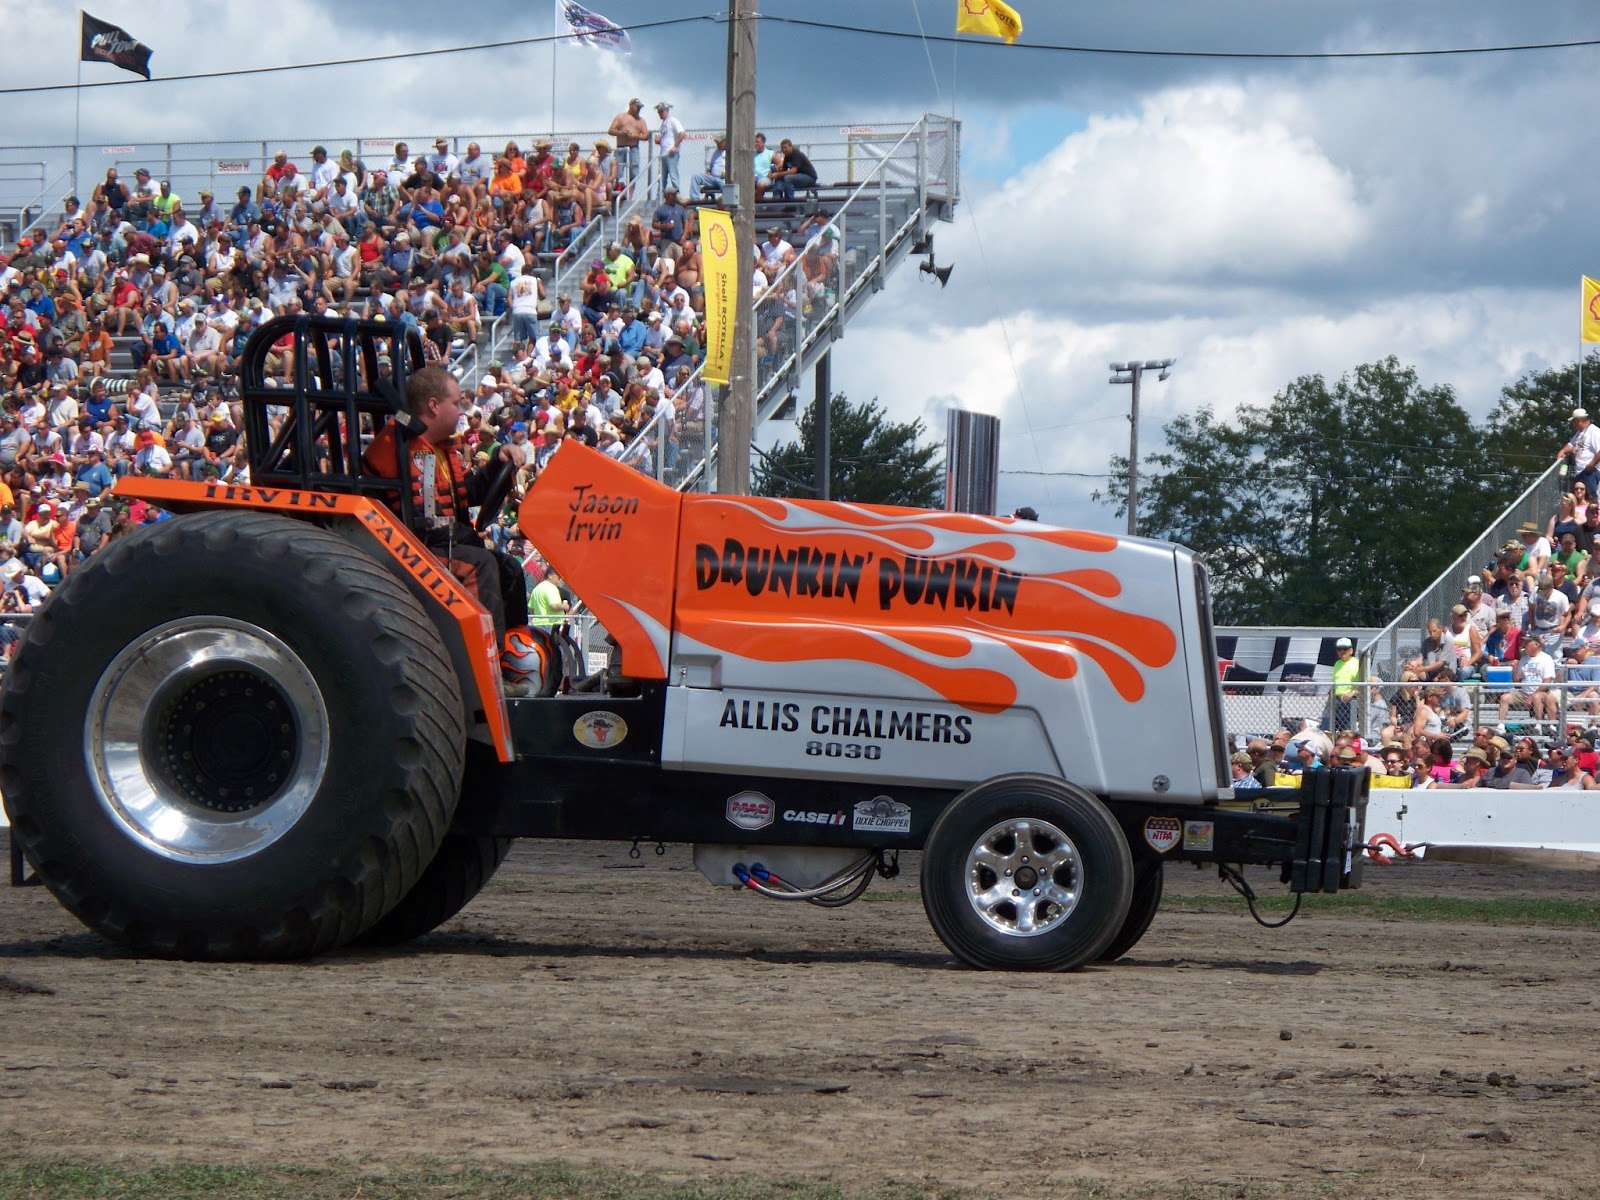 tractor pulling, Race, Racing, Hot, Rod, Rods, Tractor, R, Jpg Wallpaper